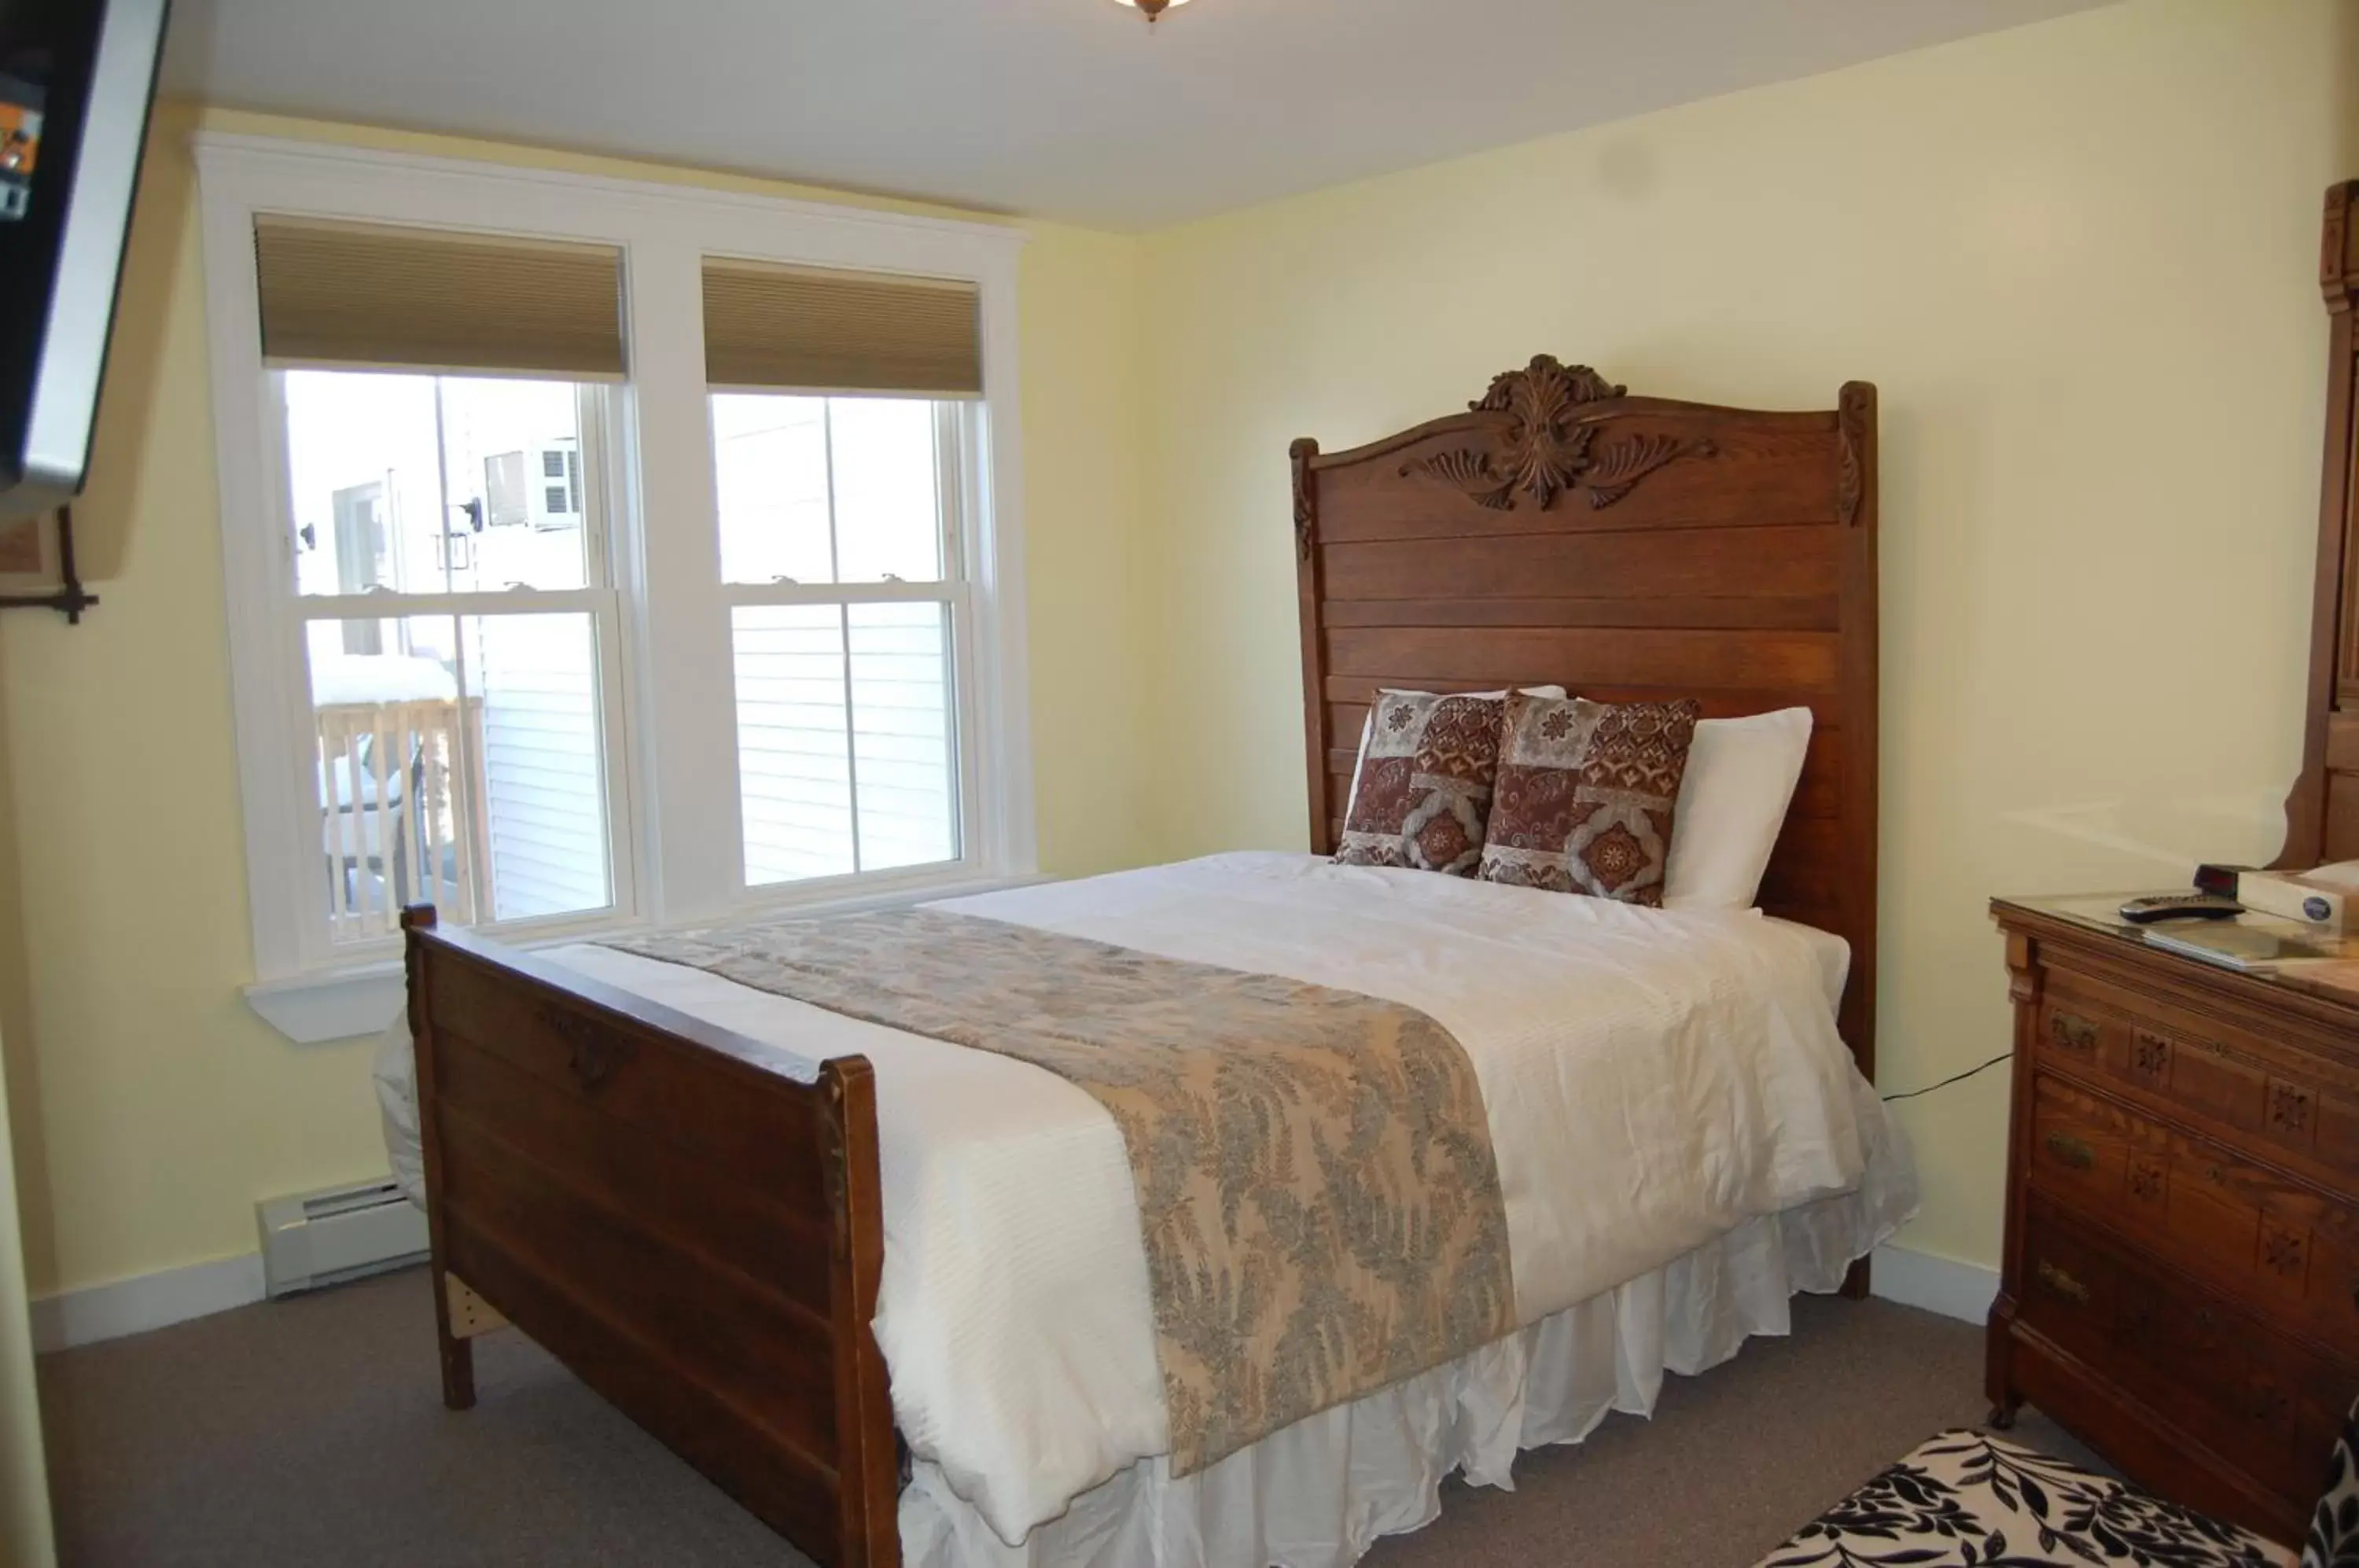 Superior Queen Room in Cranmore Inn and Suites, a North Conway boutique hotel